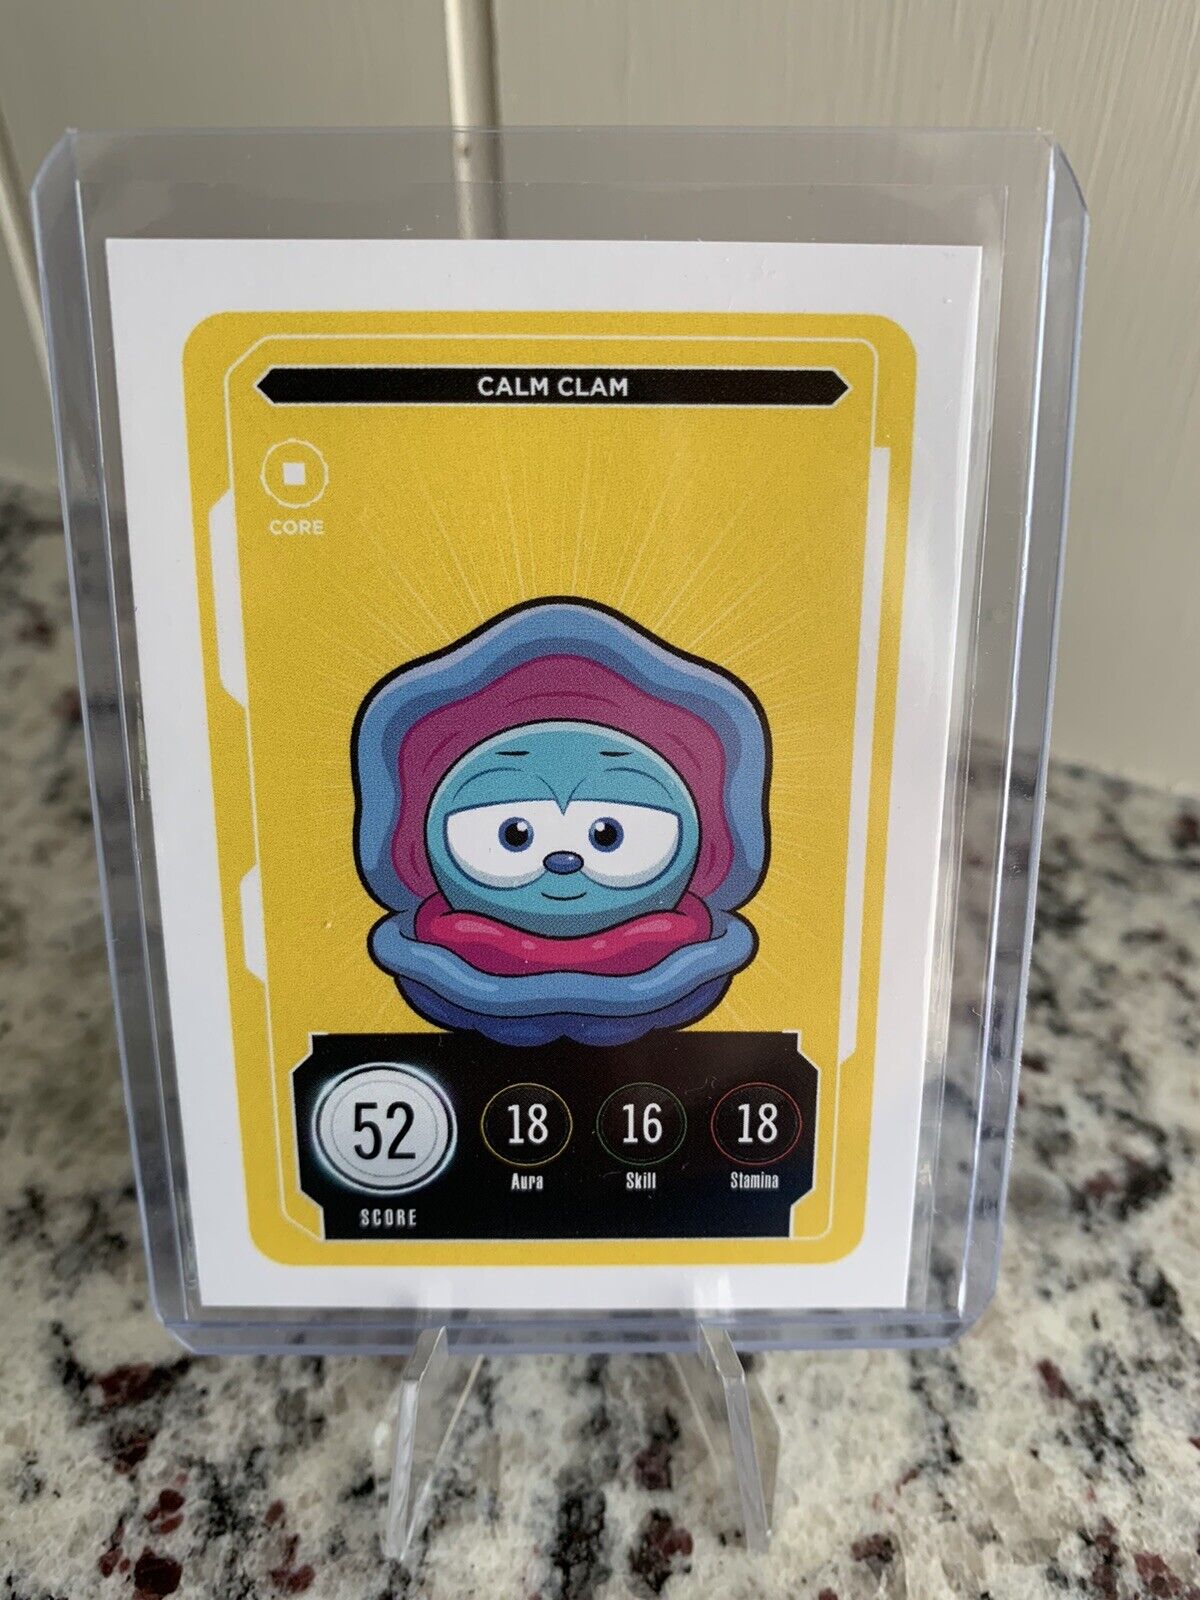 Calm Clam - Veefriends Series 2 Compete And Collect Trading Card Game